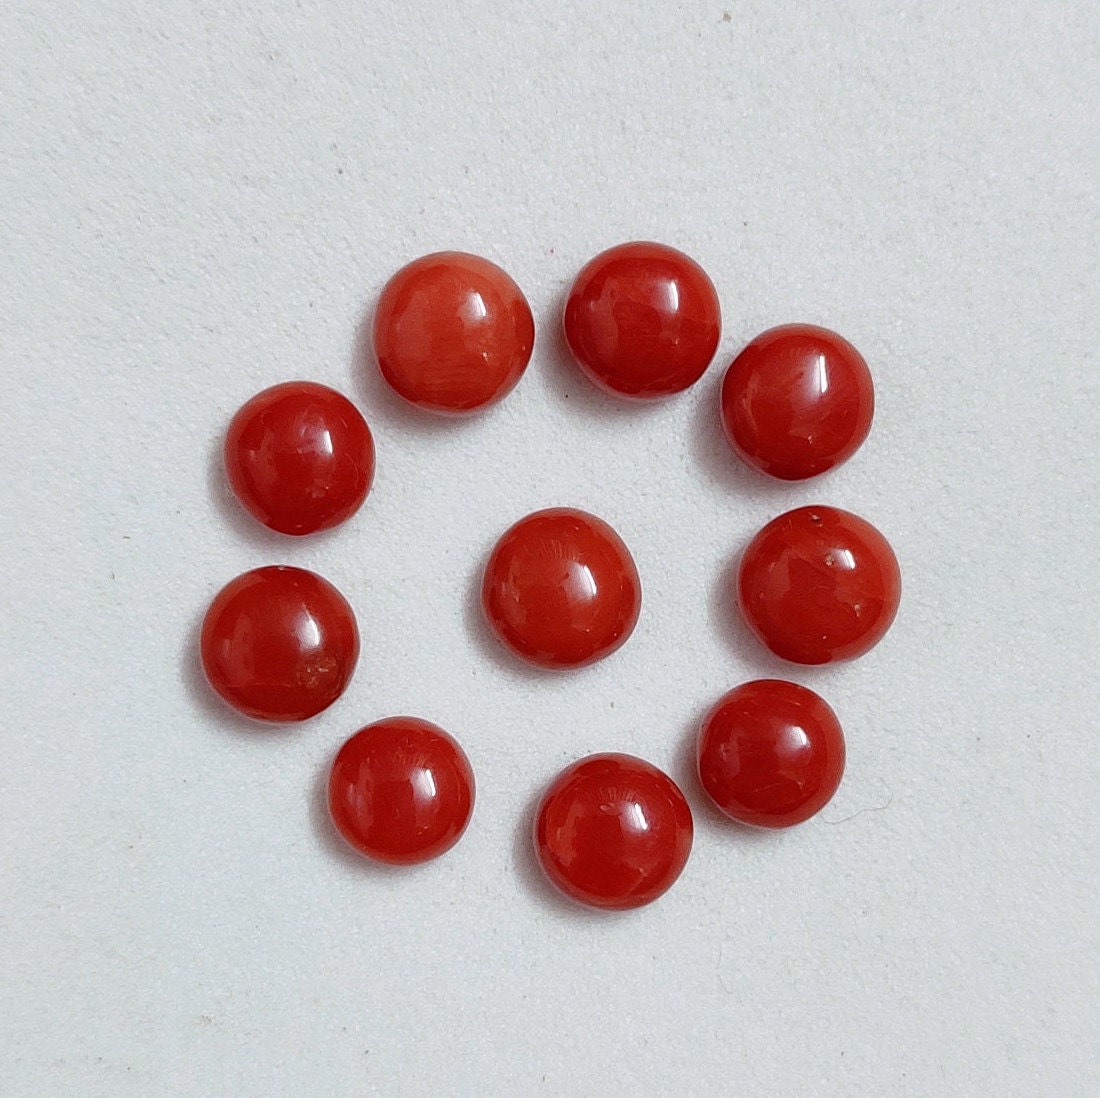 Coral Flat Back Faux MIXED Size Half Pearls 60 Grams 3mm, 4mm, 5mm, 6mm,  8mm, 10mm Half Round Embellishments, Diy, Crafts 